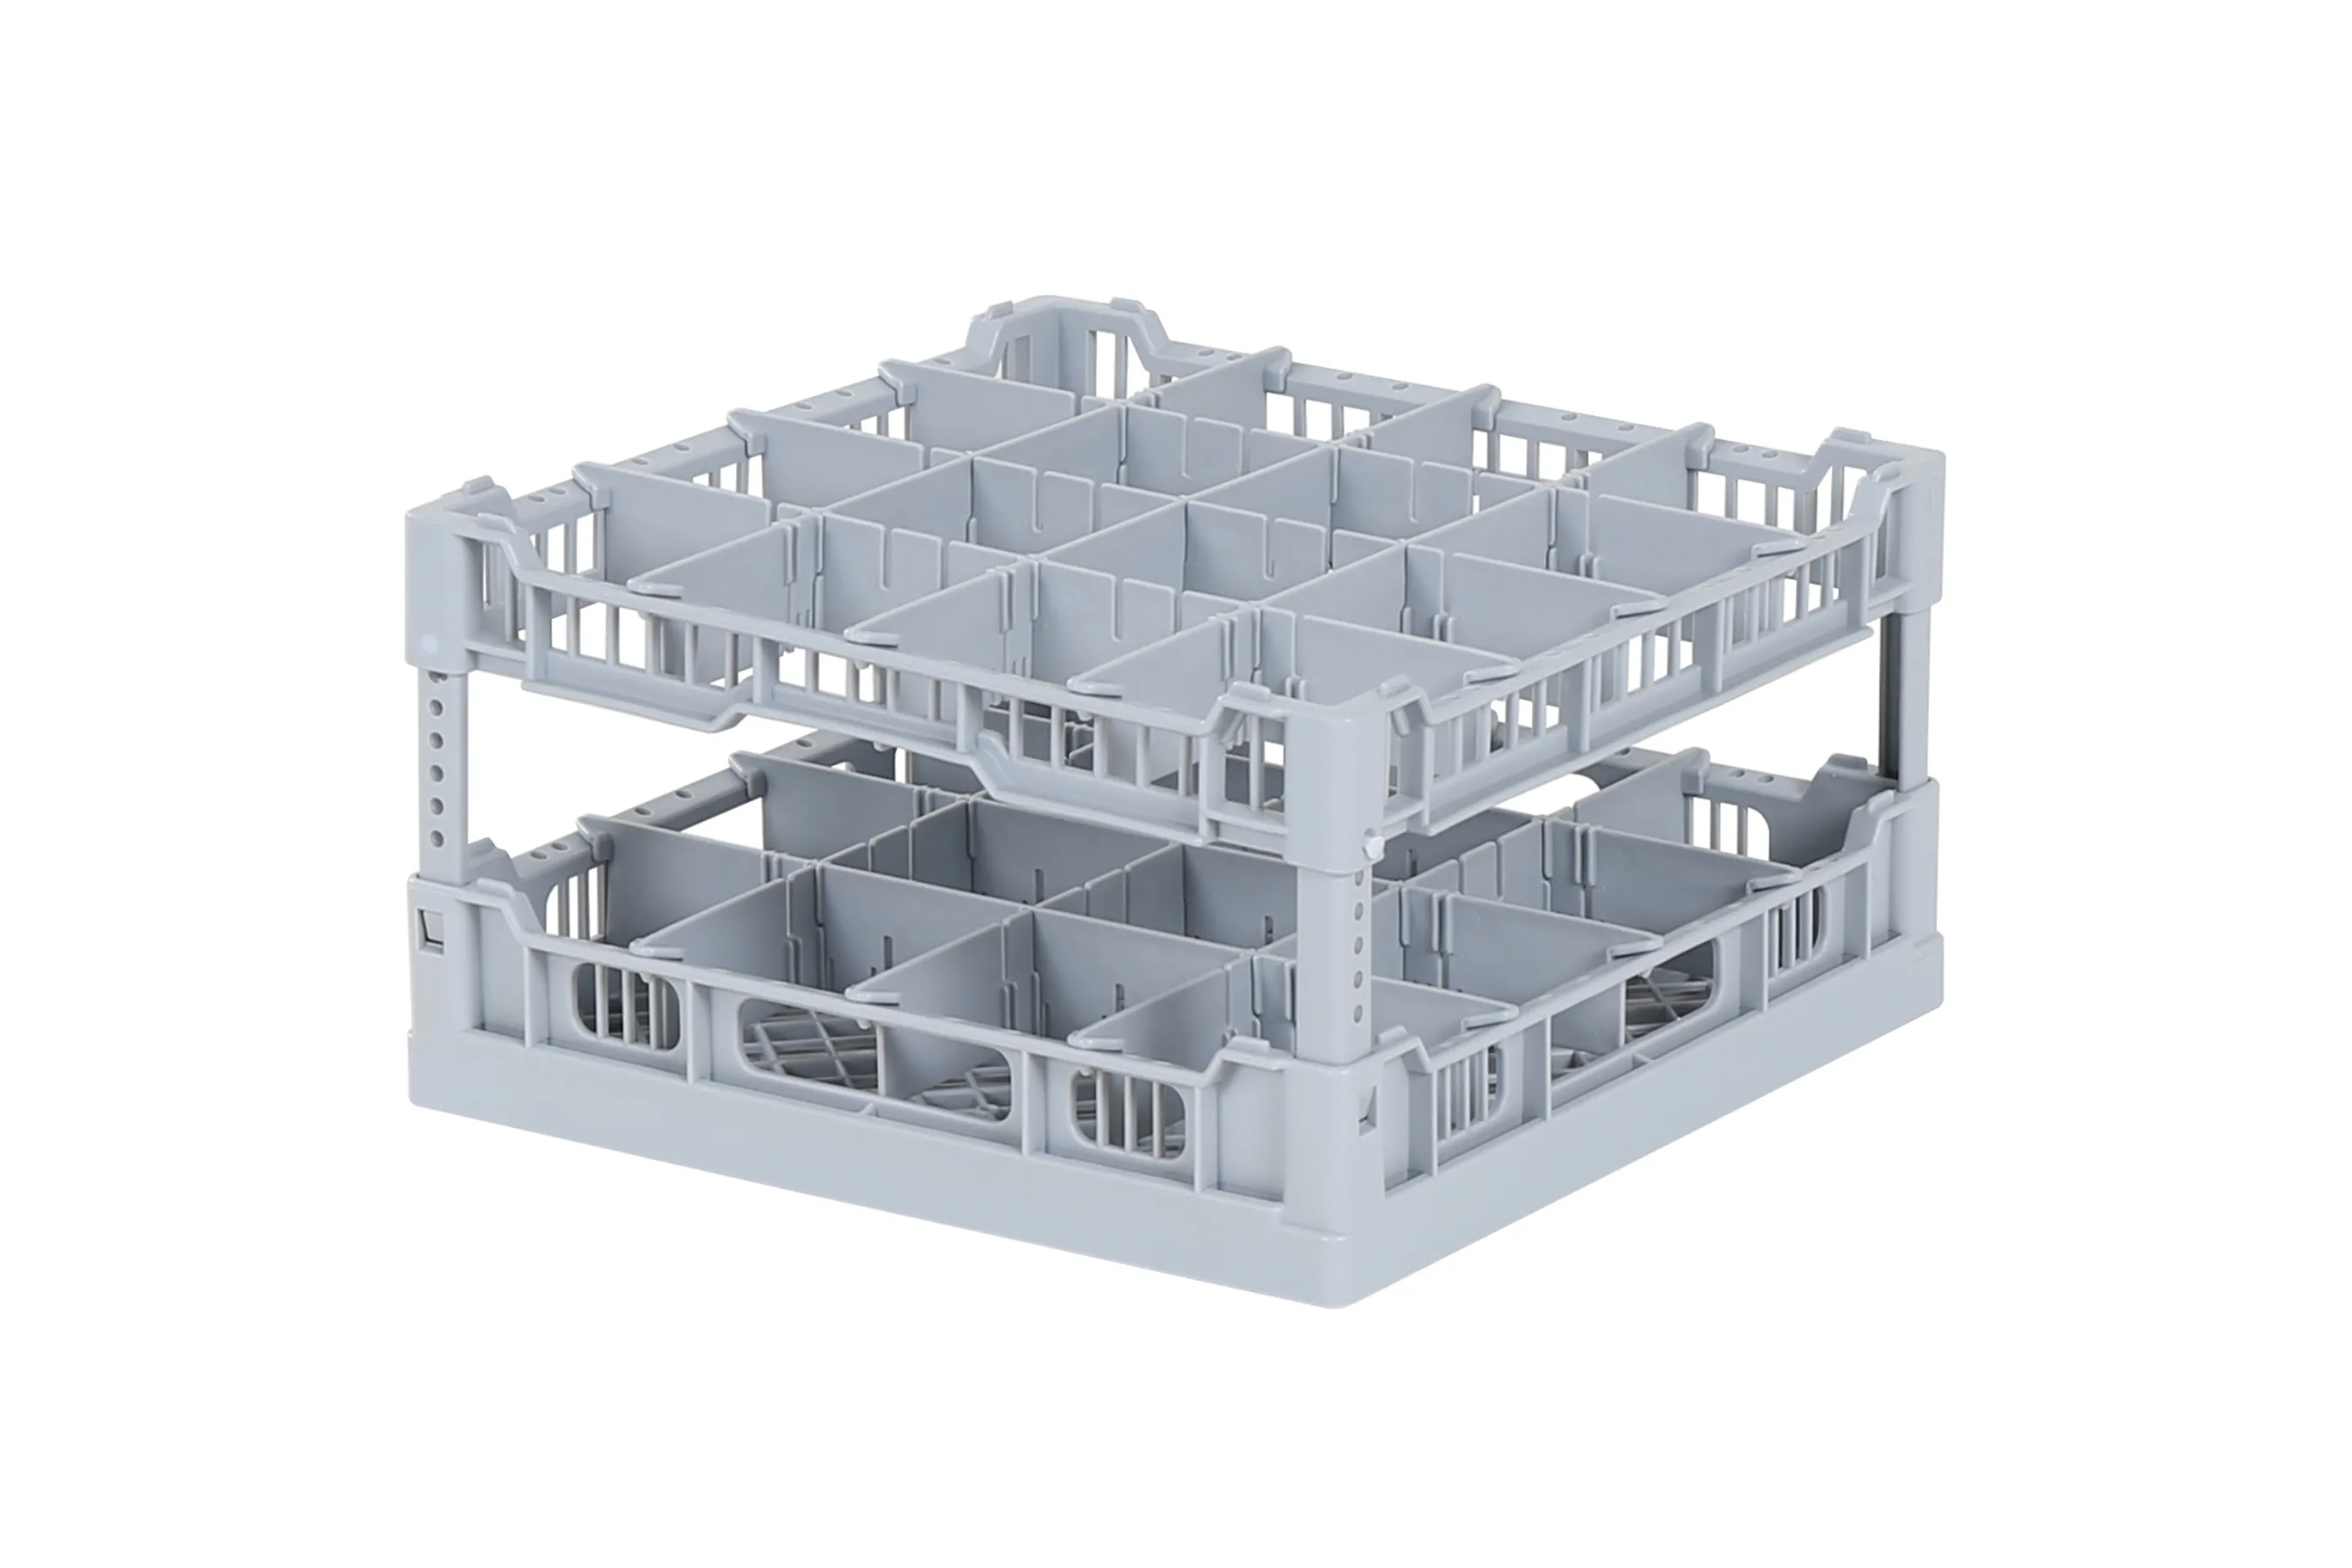 Dishwasher basket 400 x 400 mm - for glass heights from 66 to 190 mm - with 4 x 4 compartmentalization - maximum glass diameter 88mm